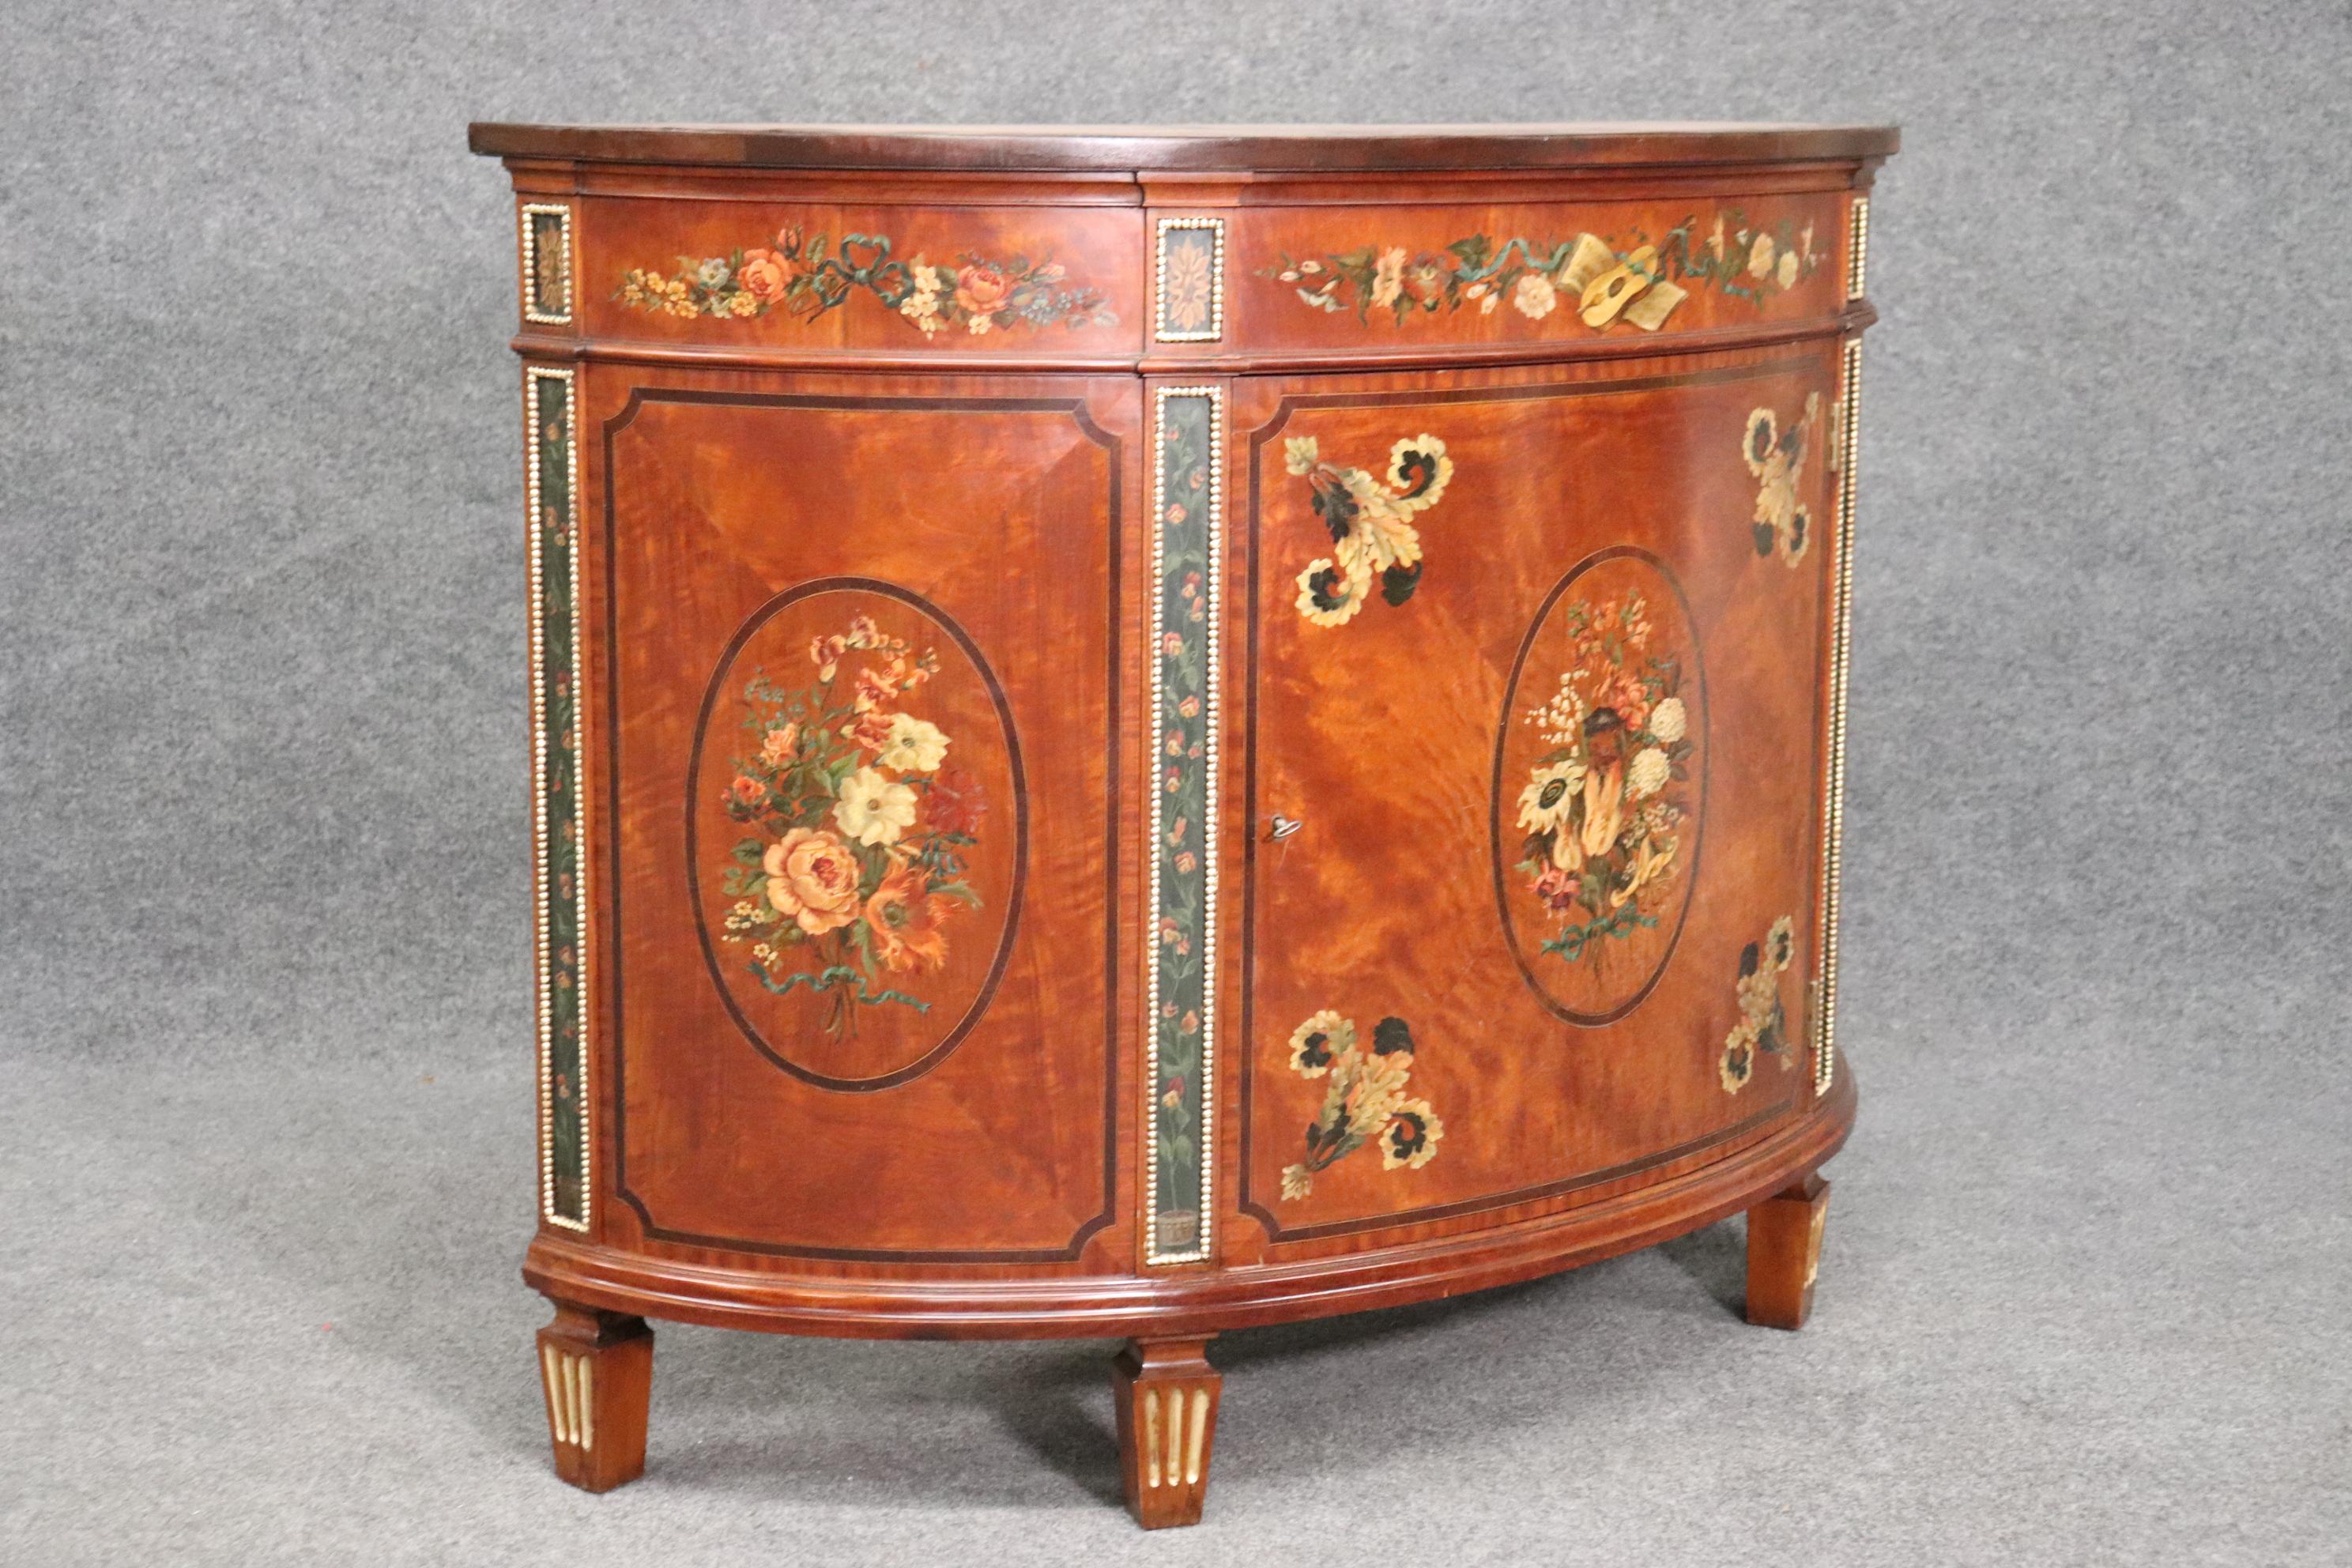 This is a gorgeous hand-painted antique Adams commode. The commode is made of solid satinwood which is rare enough, but the simple lines and design and gorgeous paint decoration adds quite a bit of character. The commode does have signs of weard and